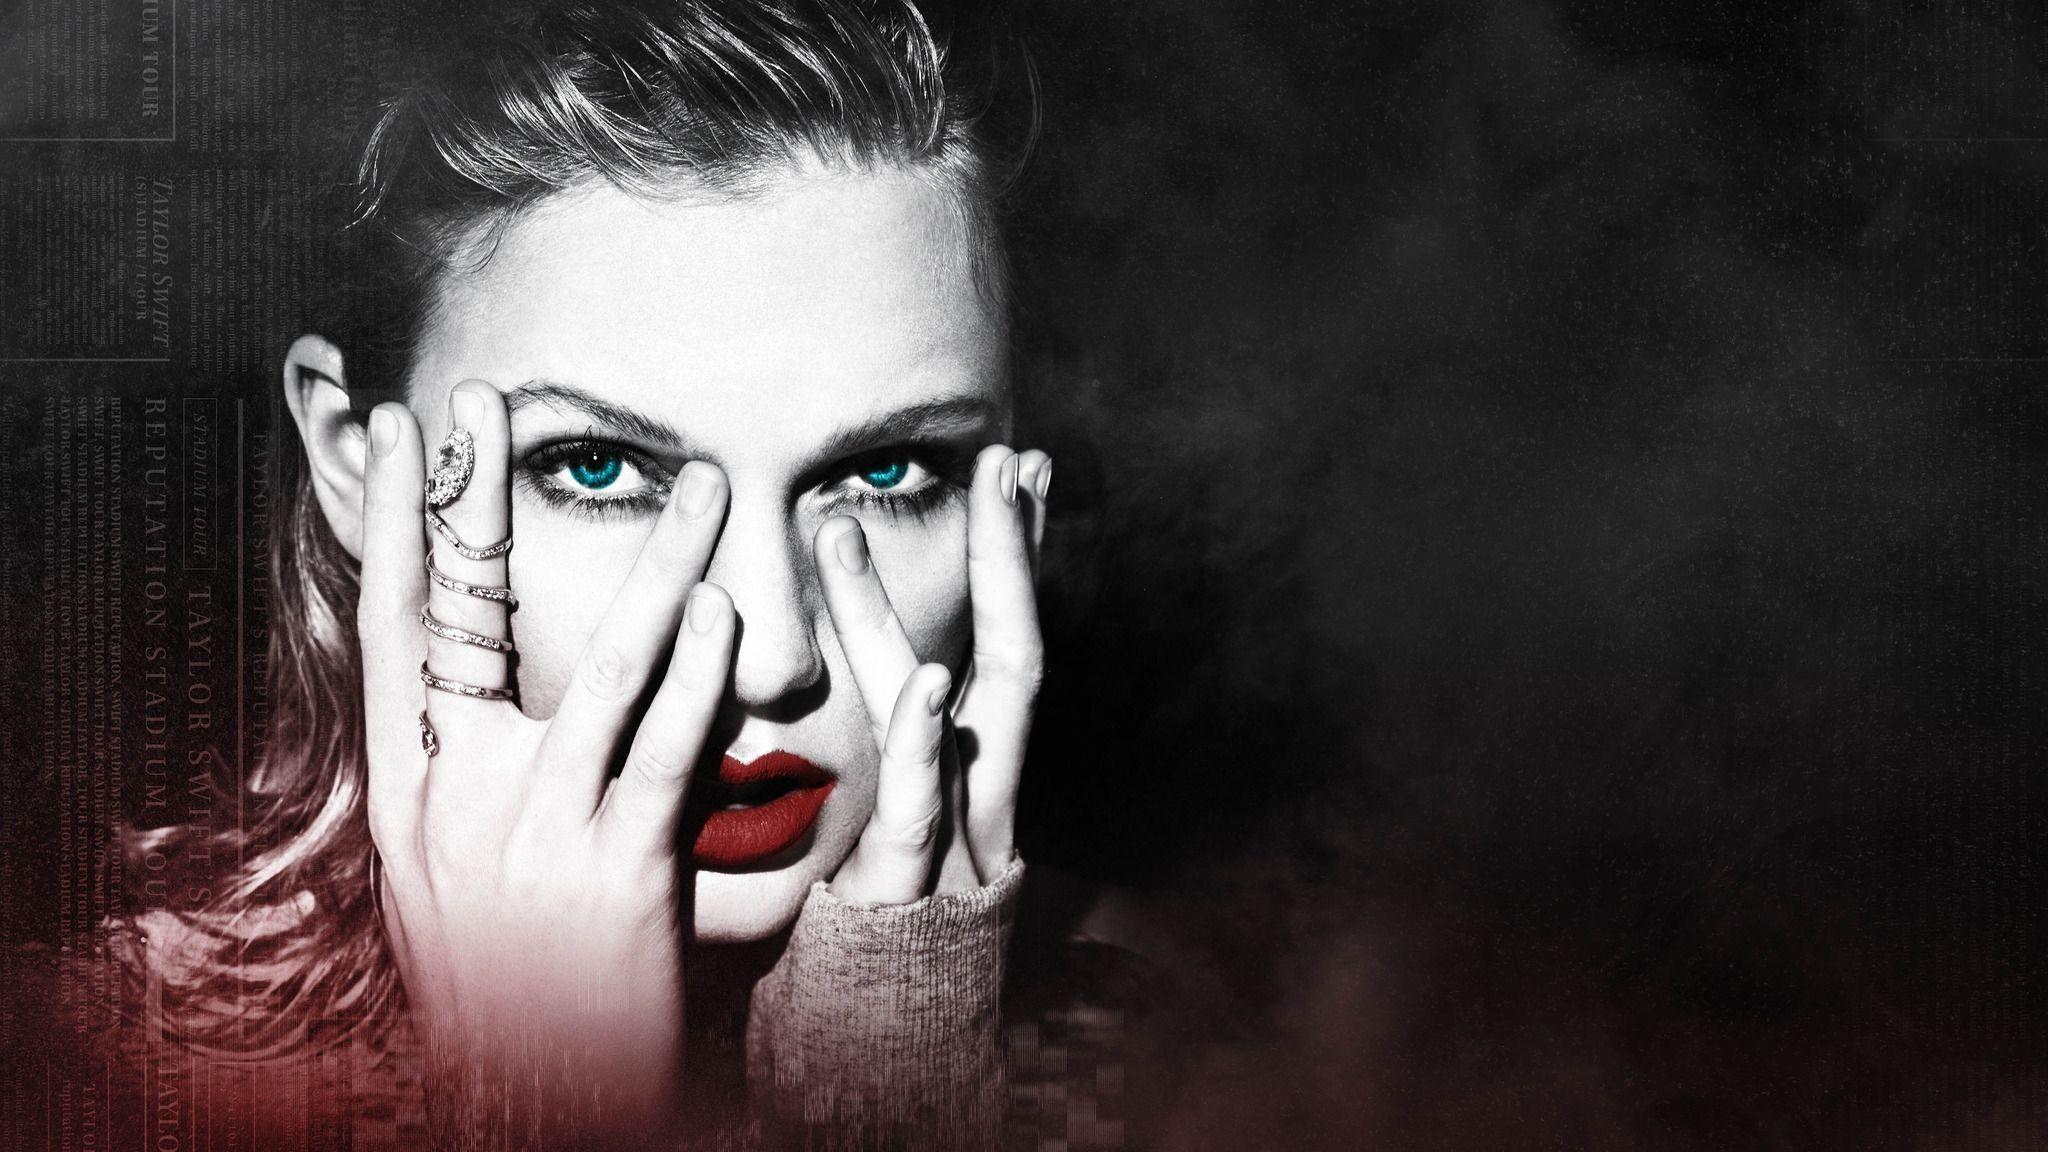 Taylor Swift Reputation Wallpapers Top Free Taylor Swift Reputation Backgrounds Wallpaperaccess